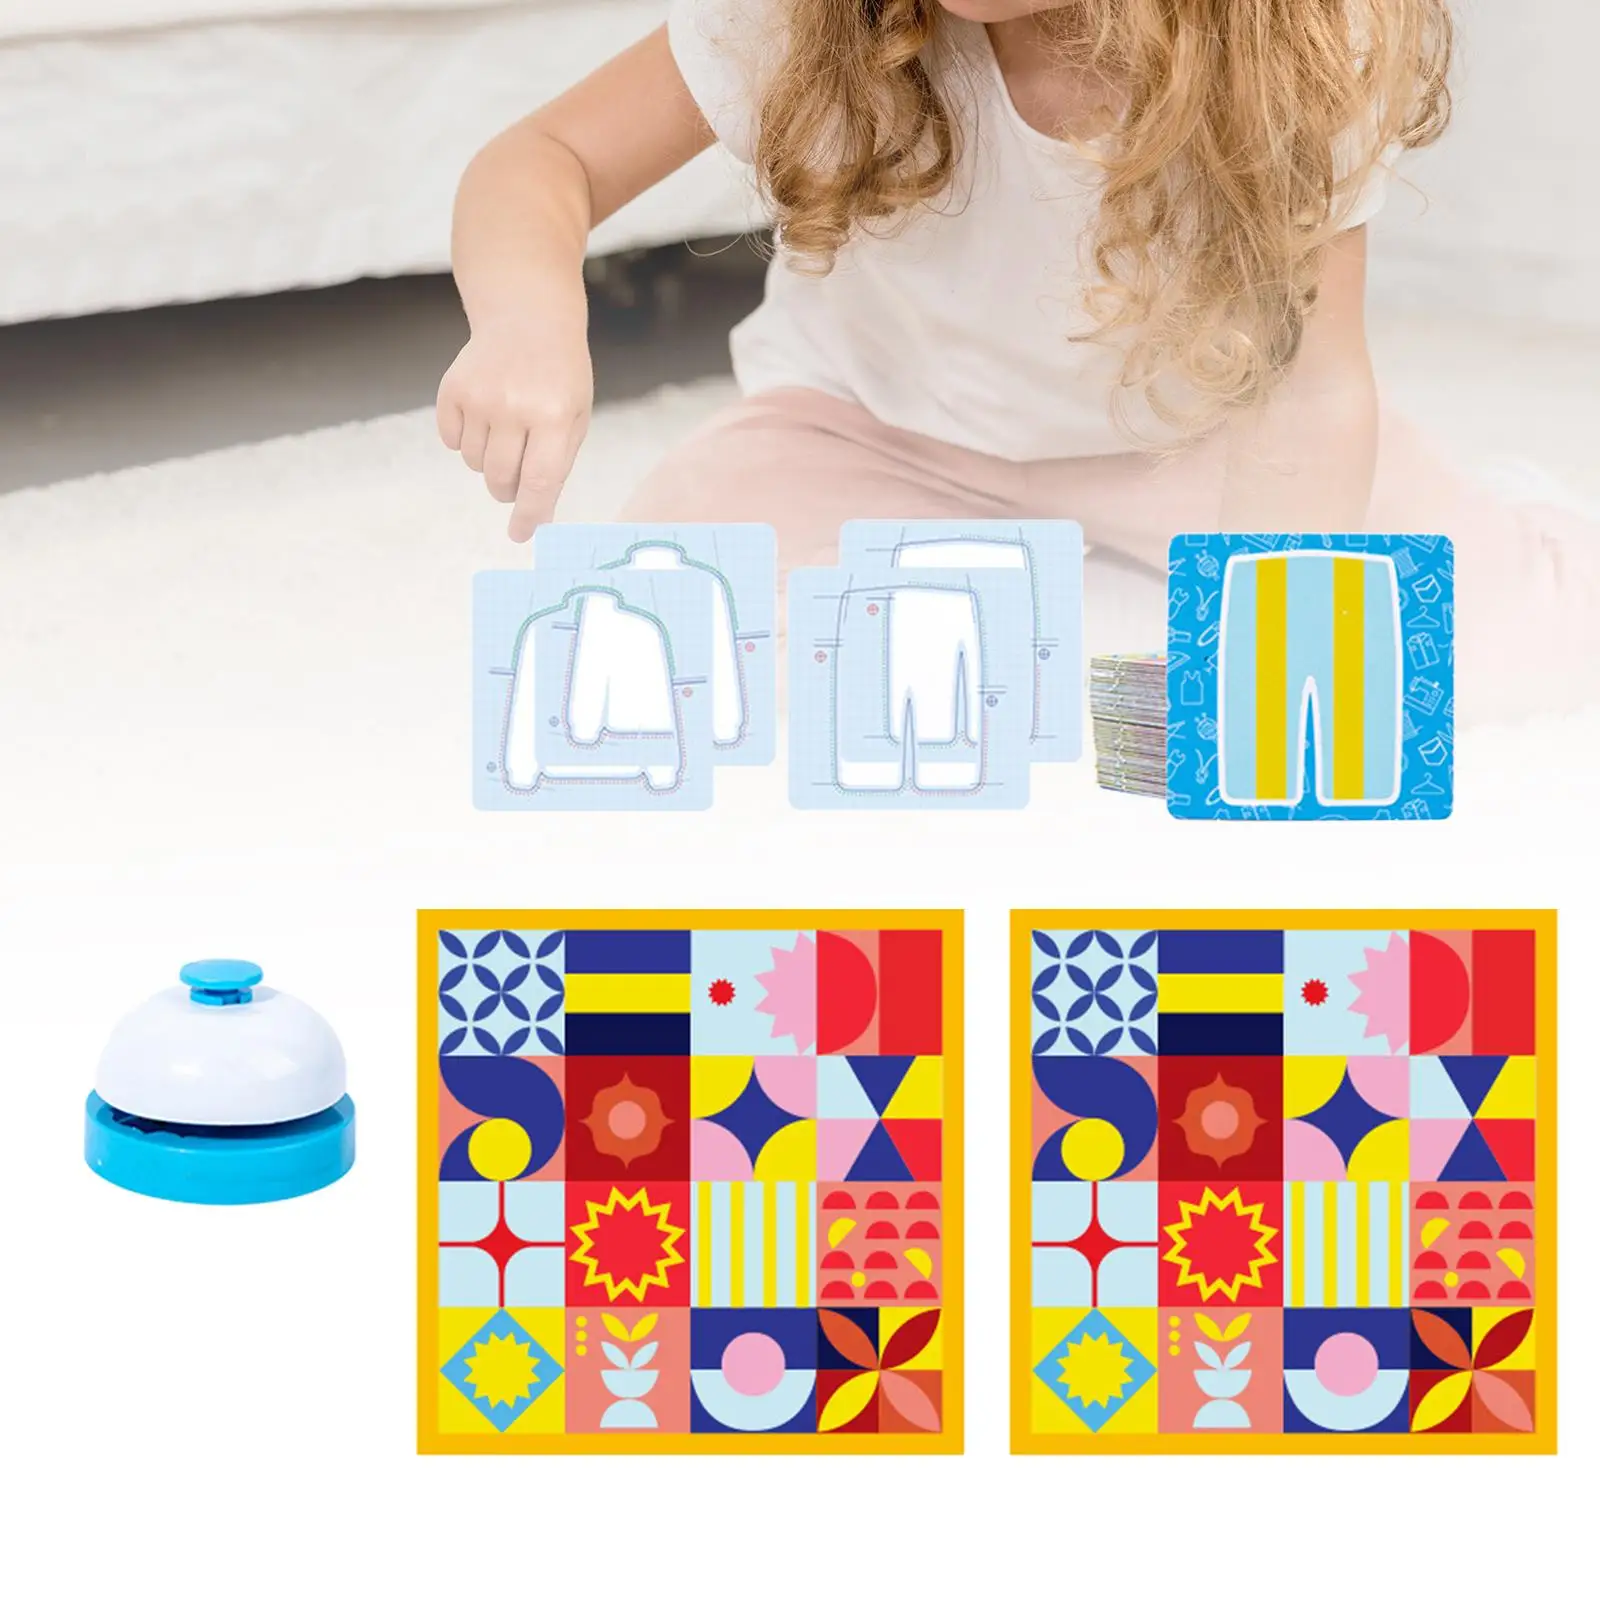 Shape Matching Puzzle Montessori Hand Eye Coordibation Early Educational Development Toy Tailor for Holiday Gift Children